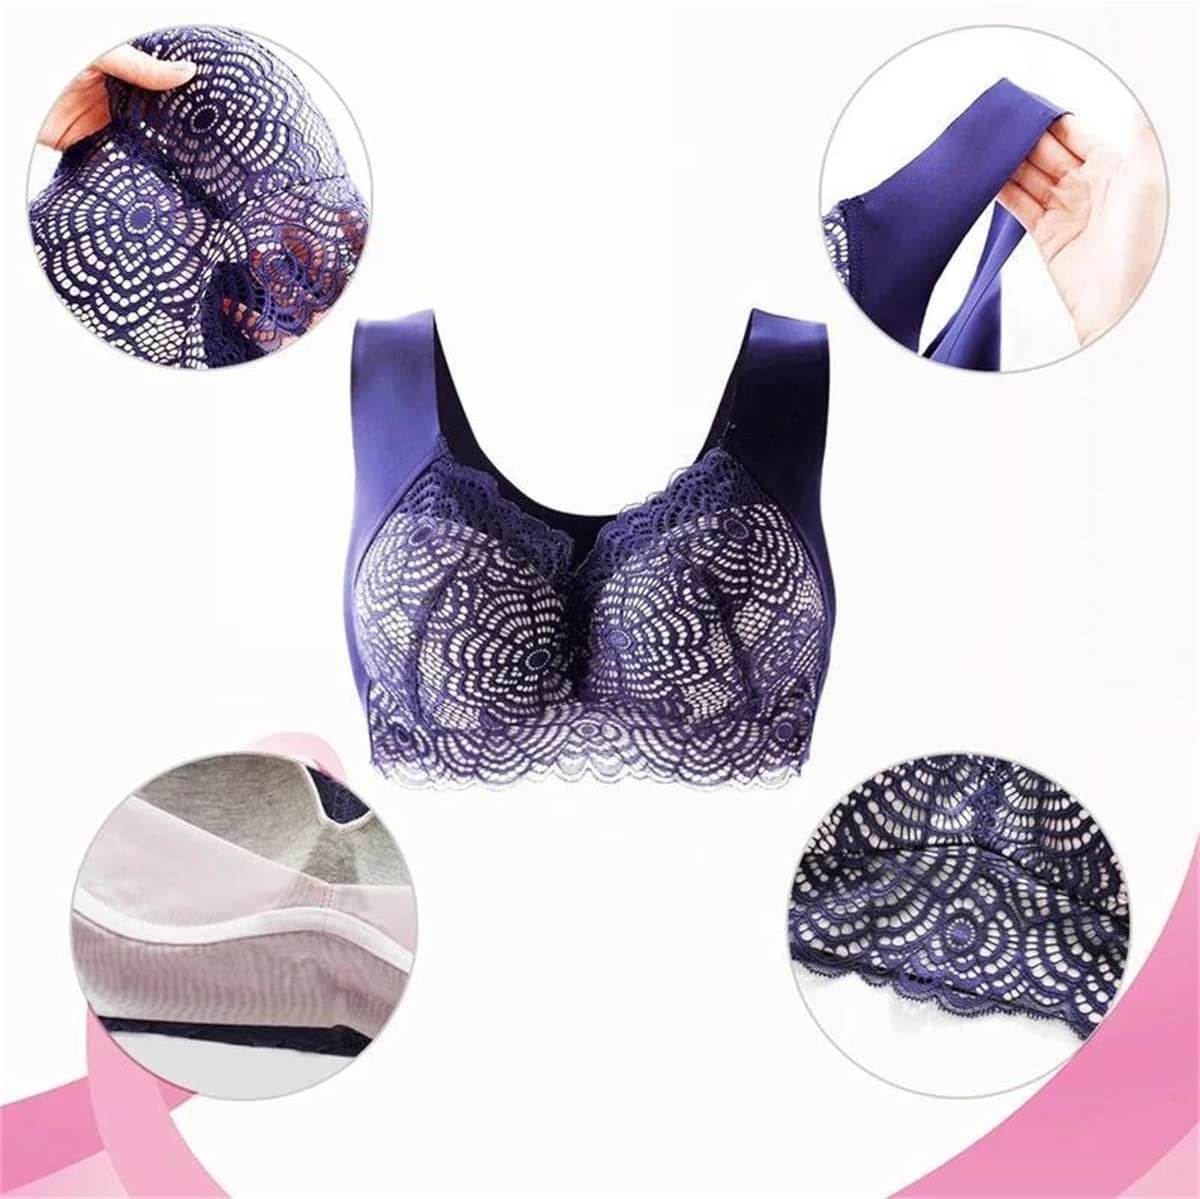 Licious-essentials - LIVERA LINGERIE light padded bra, Available in size 34E  🔥🔥🔥🔥🔥 Baddies with the tiny waist and boobs, this bra is for you. It  packs all the boobs and gives it